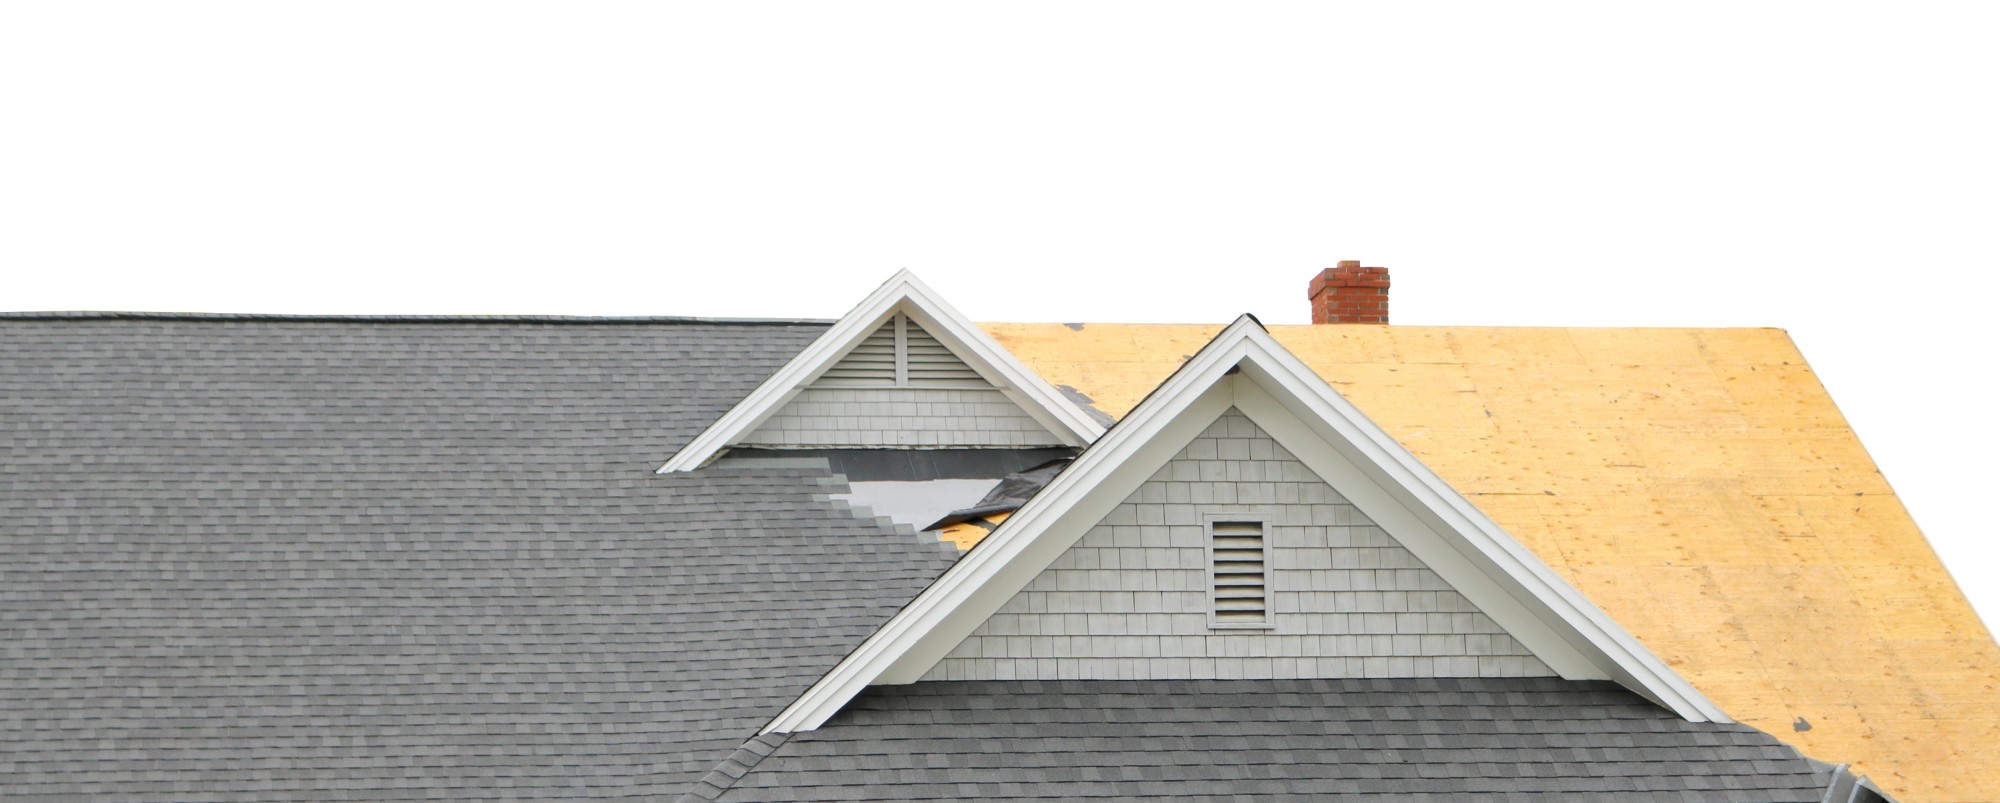 There are several ways to tell whether you should replace your home's roof. This guide covers the common signs you need a new roof.